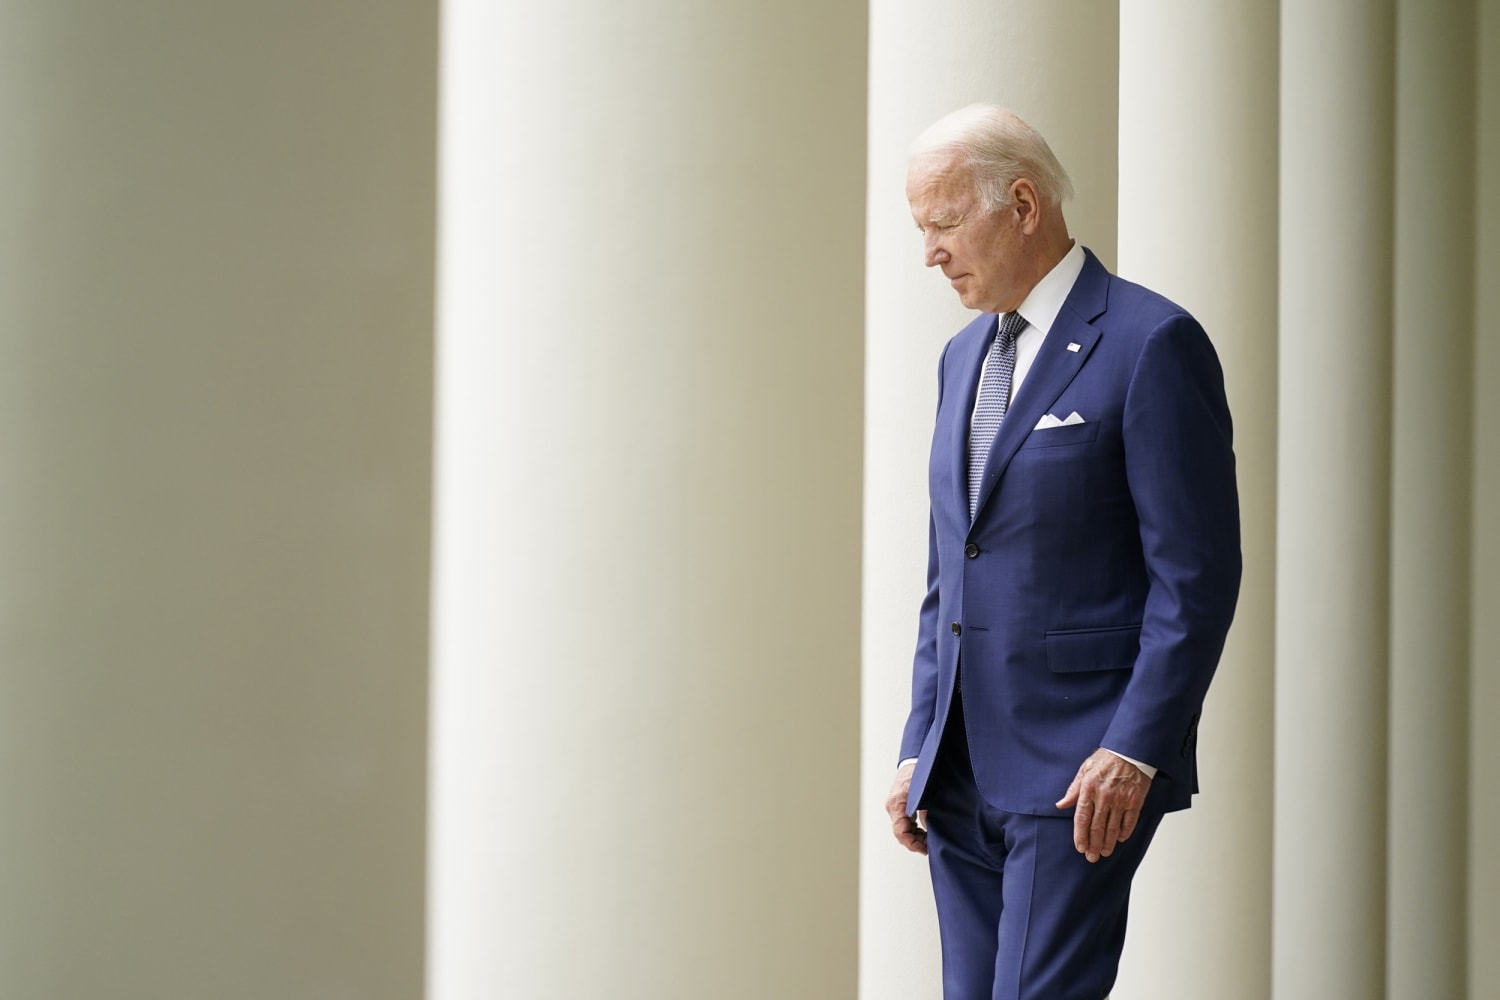 Guns, drugs and migrants: Biden heads to Mexico to face diplomatic challenges with North American allies